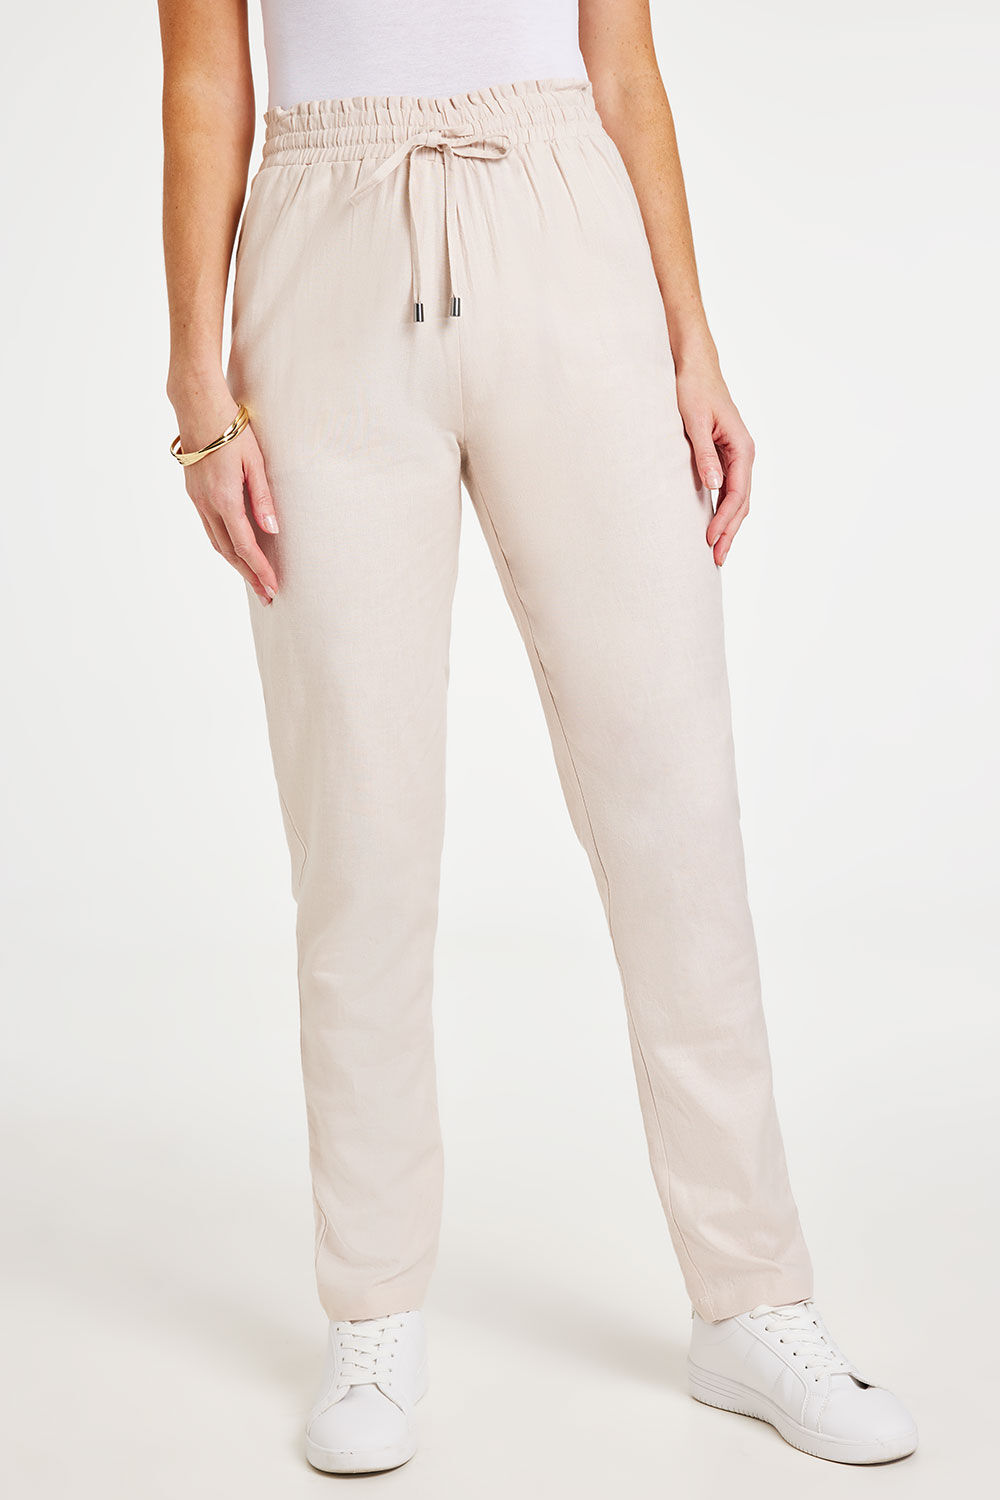 Bonmarche Stone Paperbag Tie Waist Tapered Linen Trousers, Size: 24